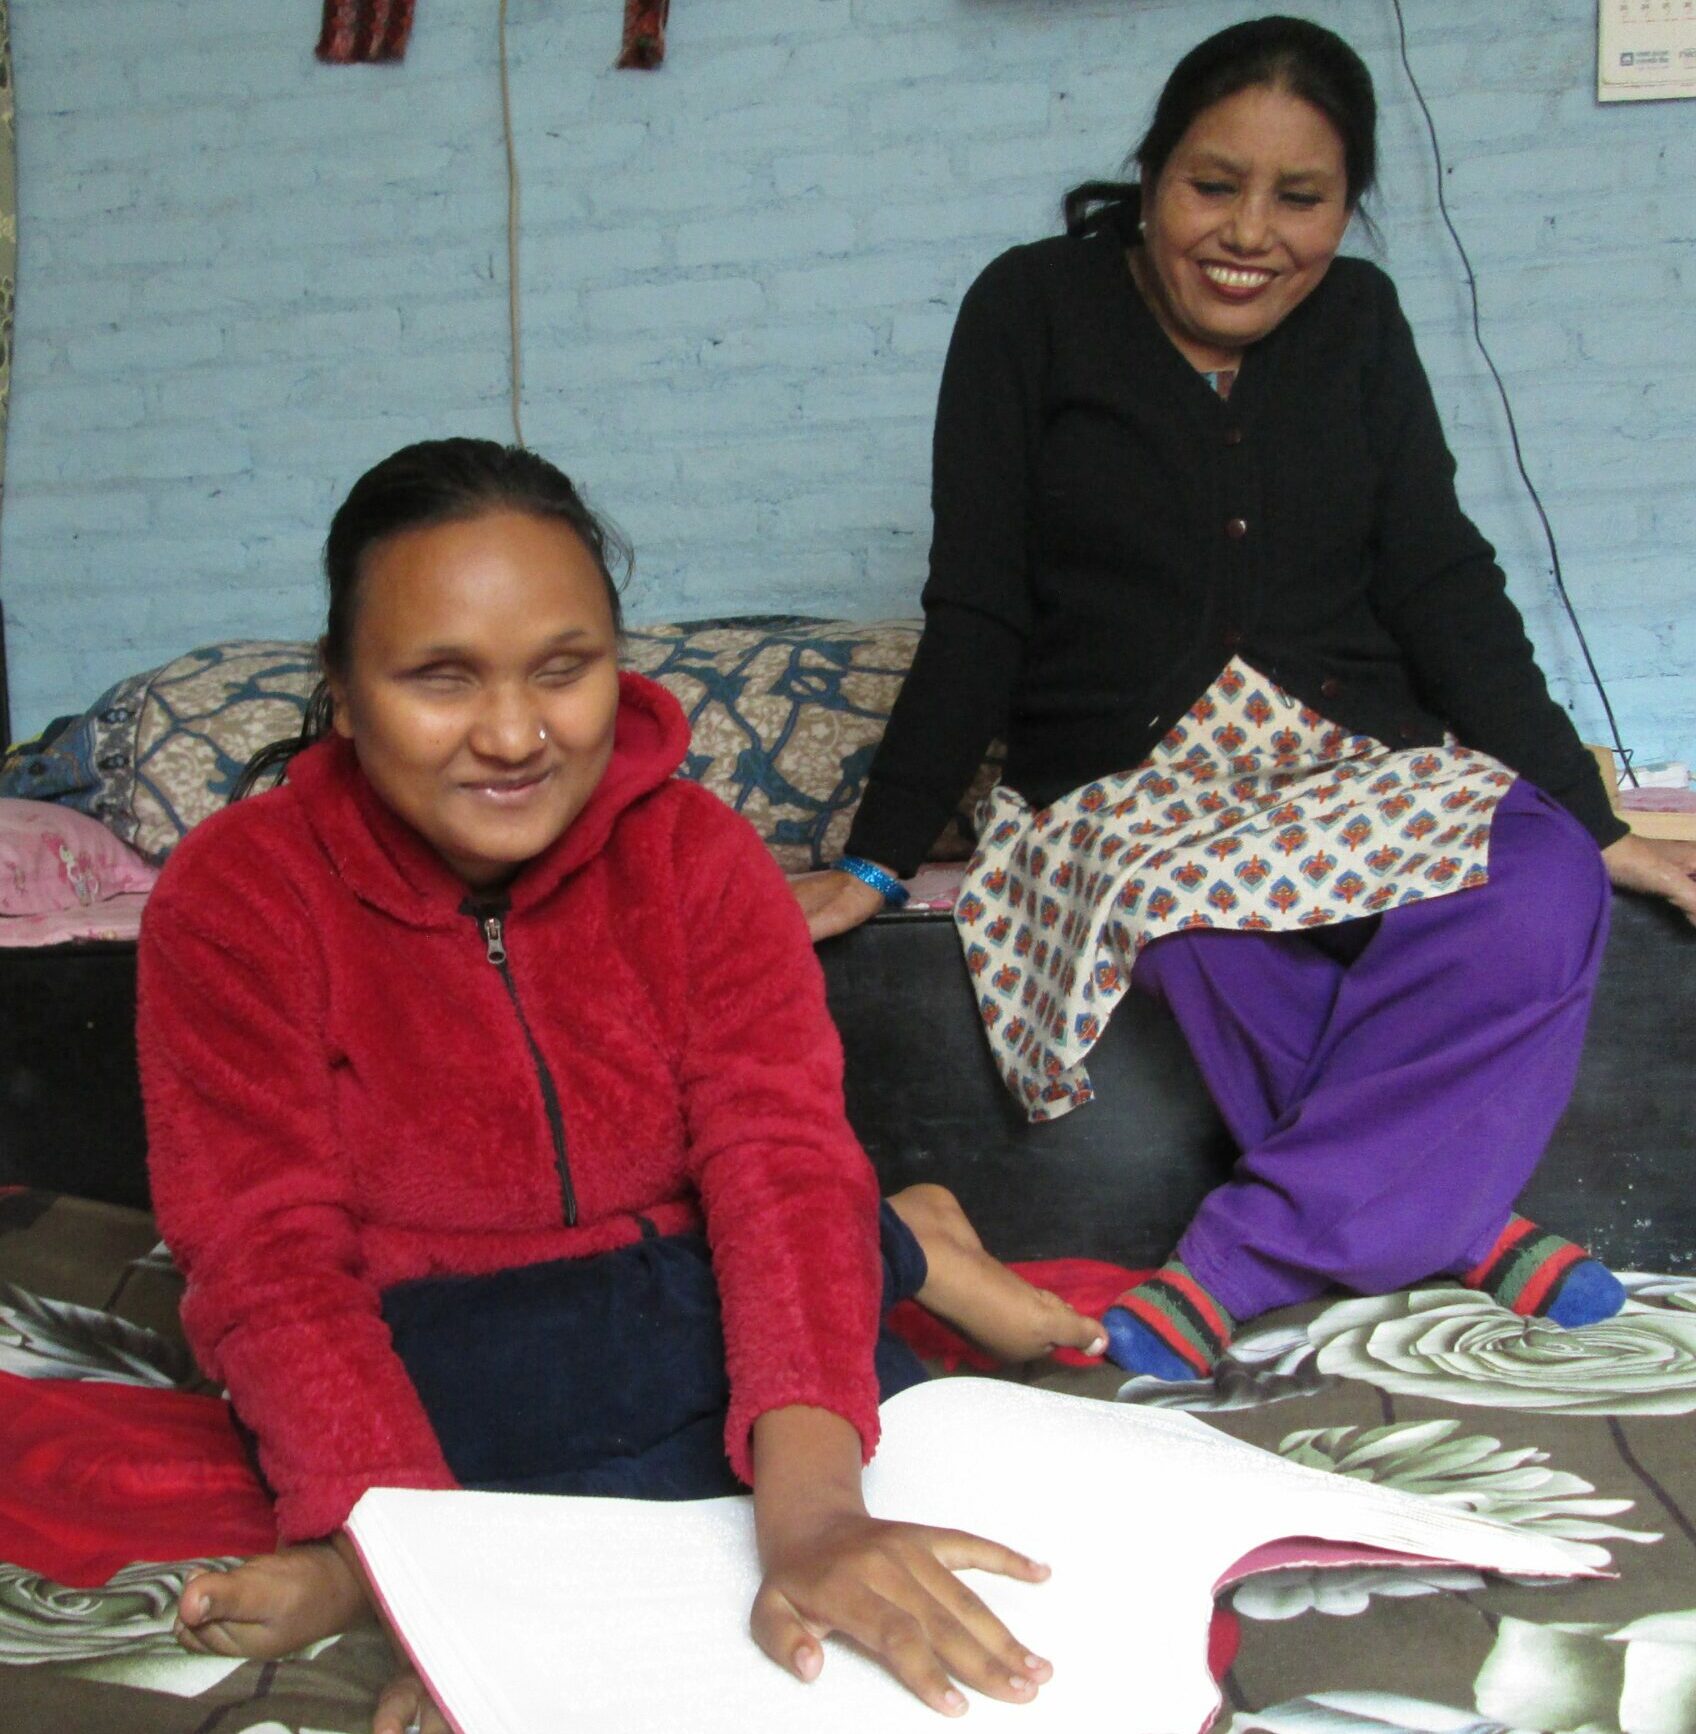 A smiling young blind woman sits on the floor with one hand on the Braille pages of a book. Her mother sits behind her, smiling.